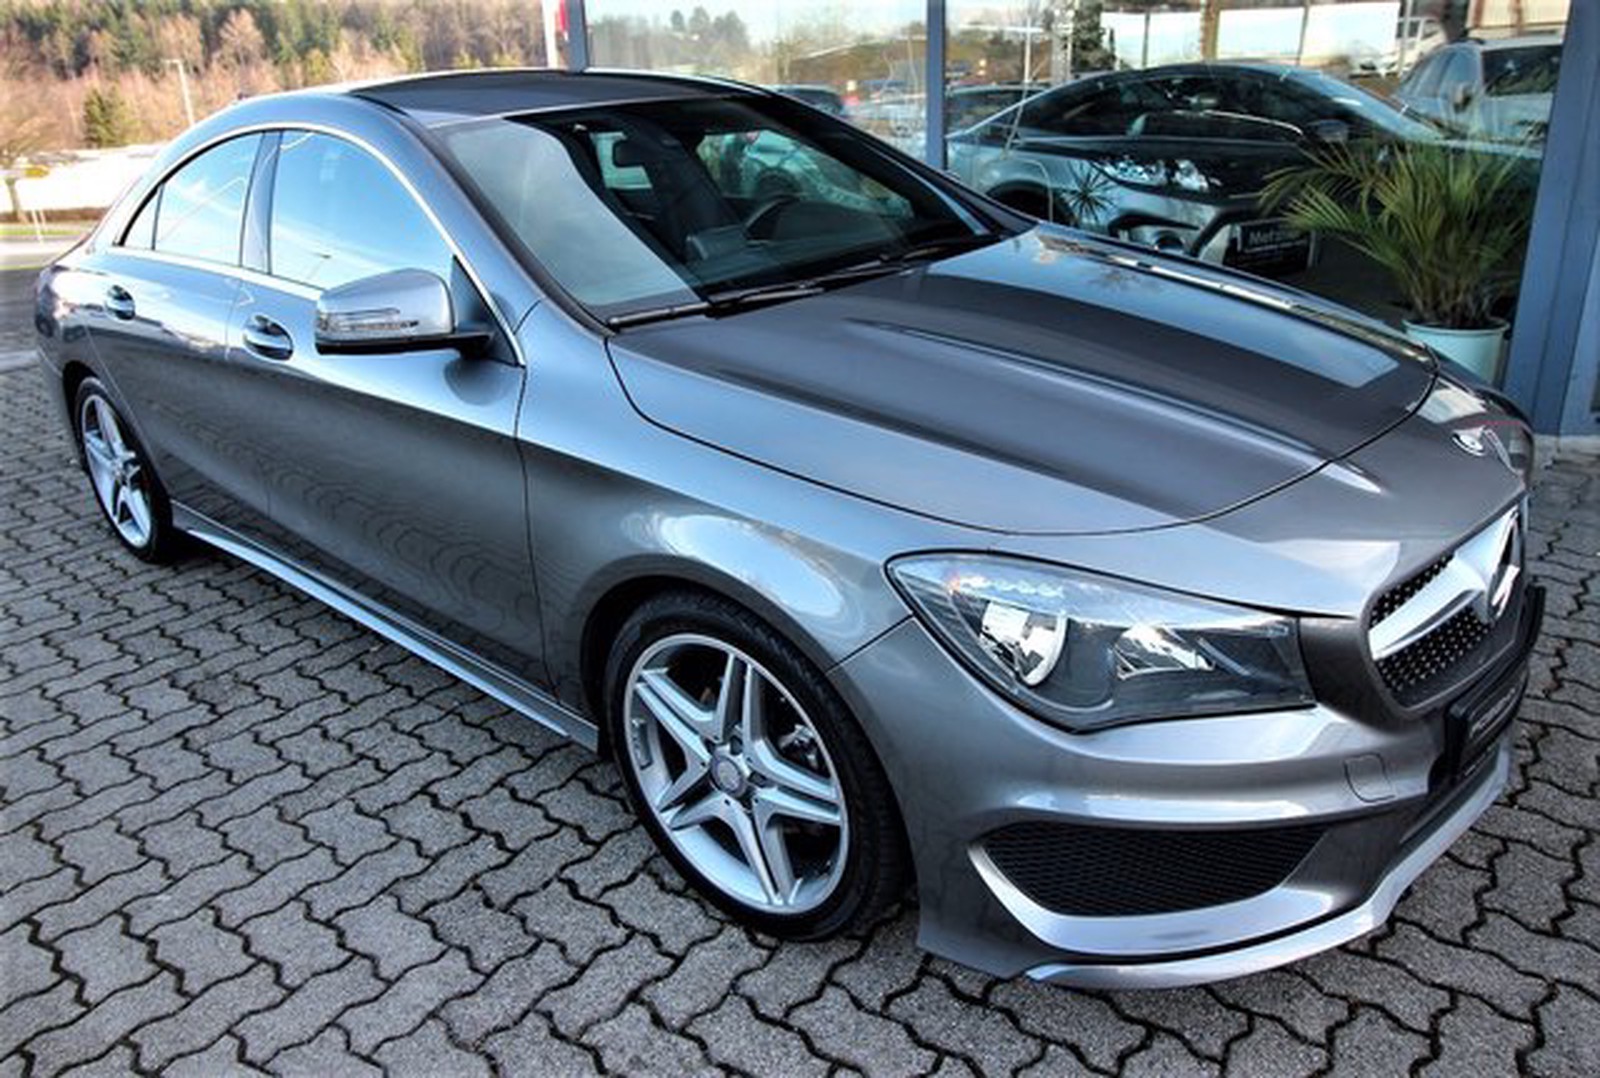 Mercedes Benz Cla 200 Cdi Amg Line Leder Navi Comand Shz Used Buy In Hechingen Bechtoldsweiler Price 20450 Eur Int Nr 1238 Sold